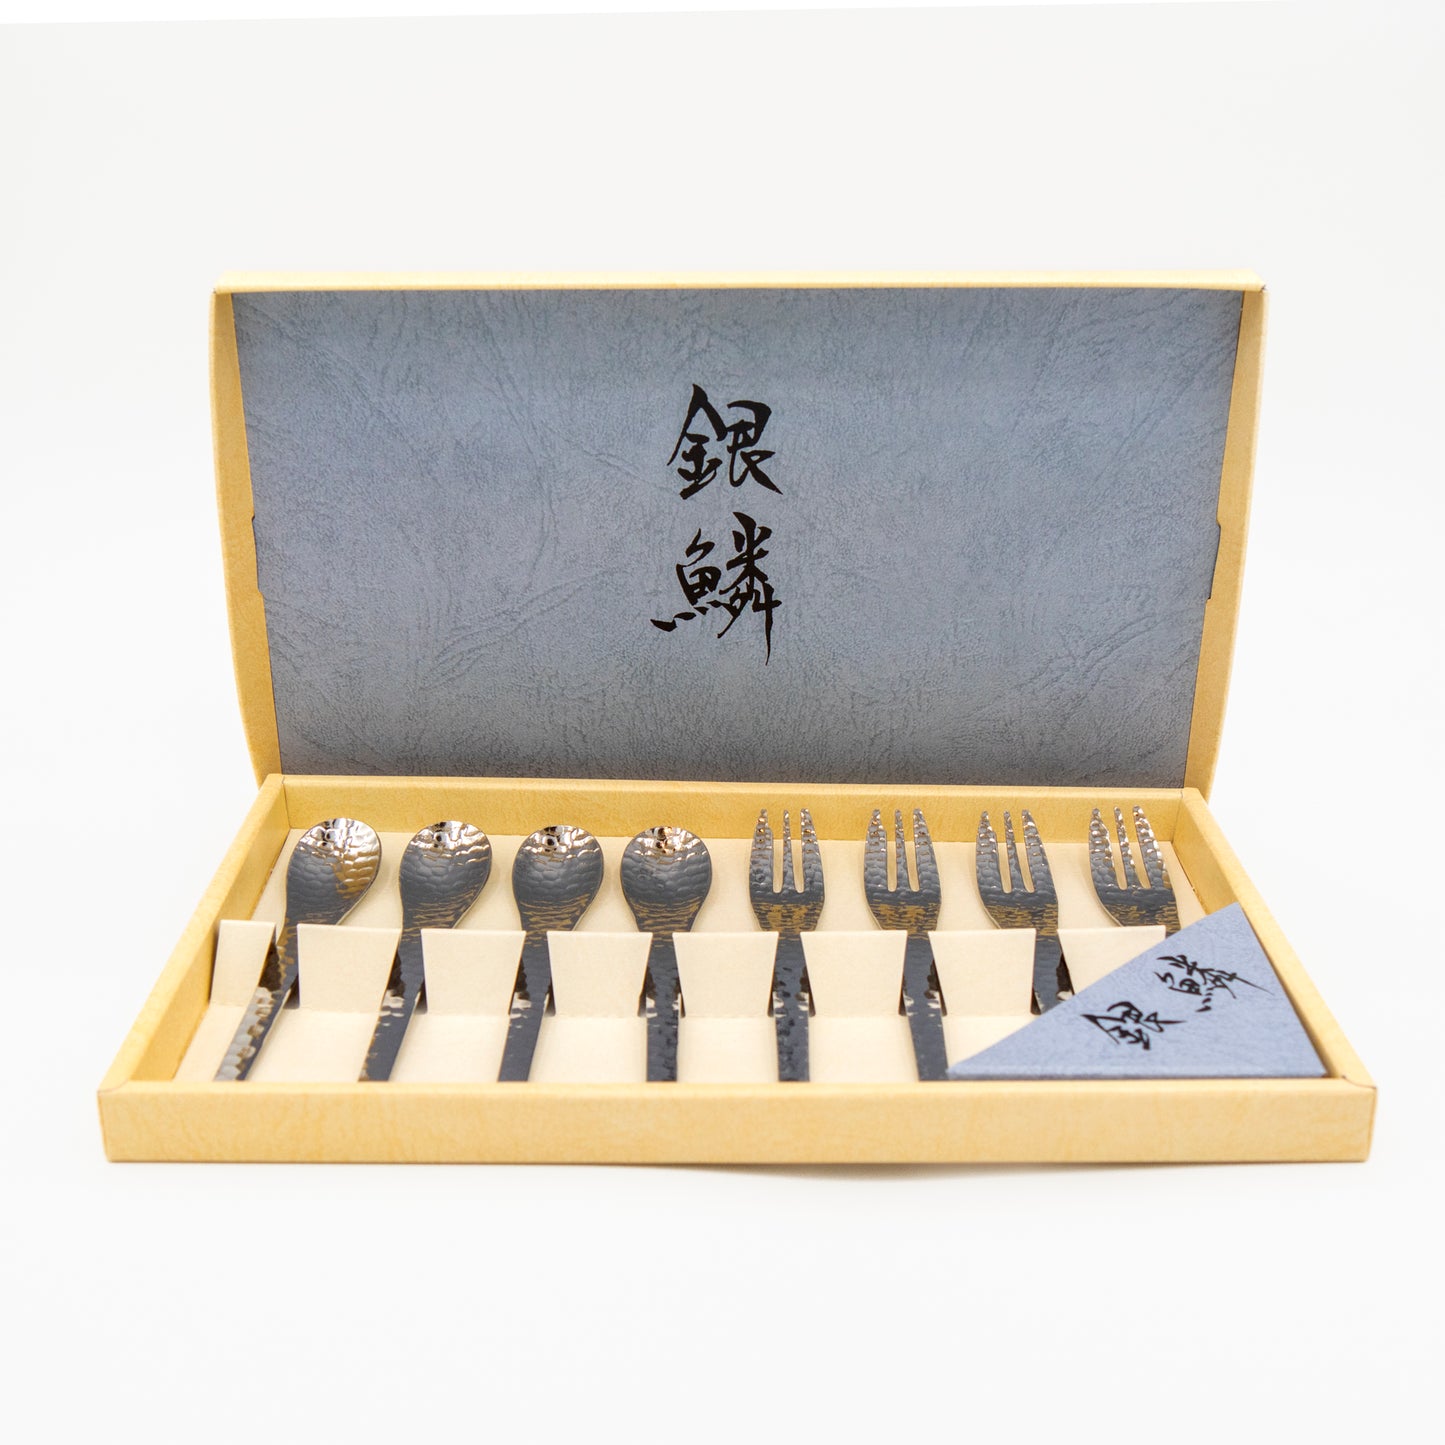 Japanese Cutlery Sets - 8 Pieces